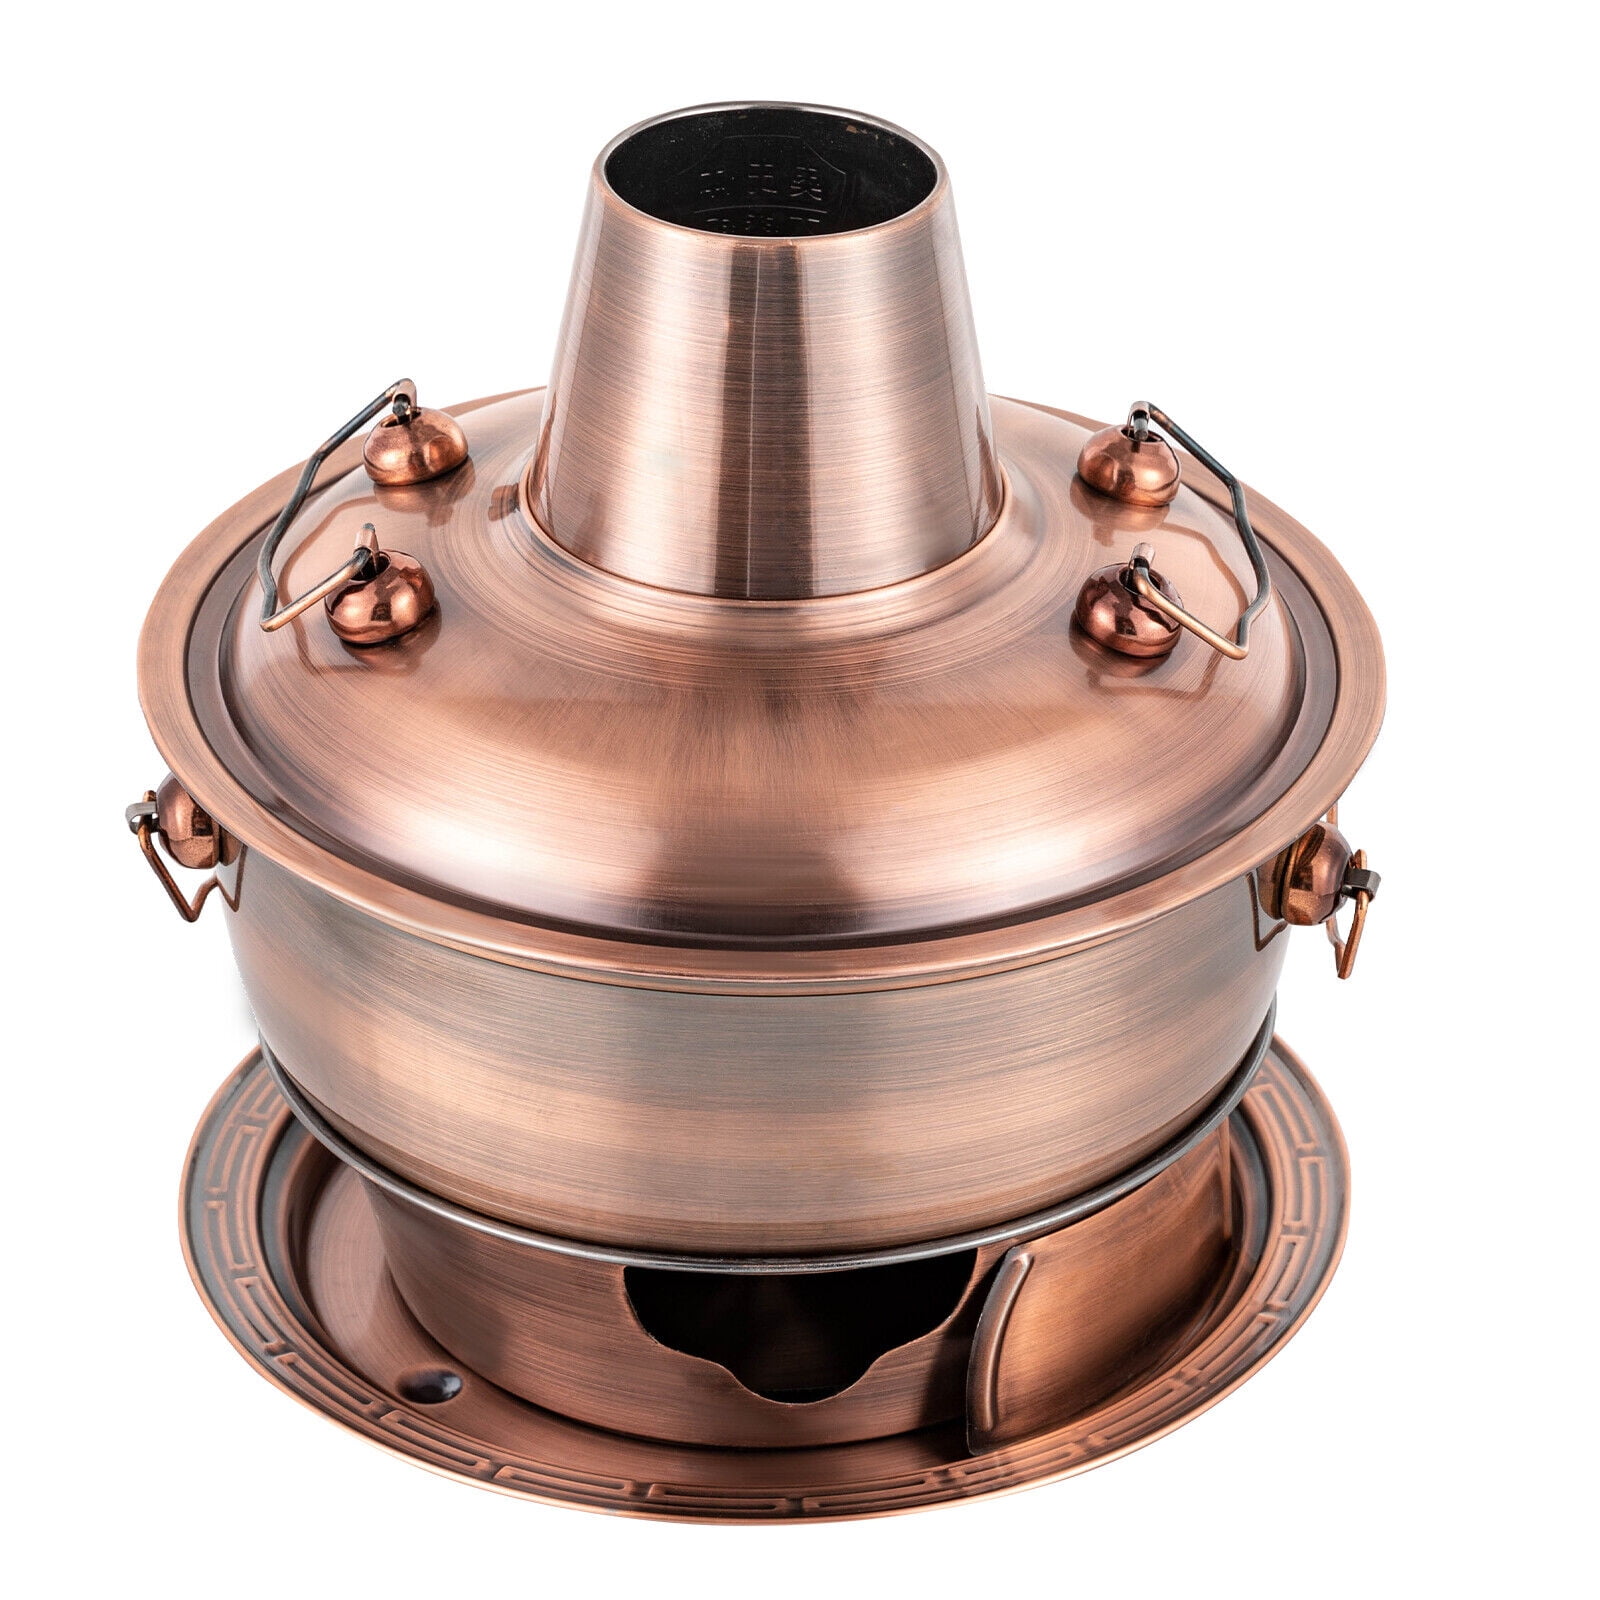 CENHOT Divided Pot For Hot Pot With Enamel Coated Manufacturers